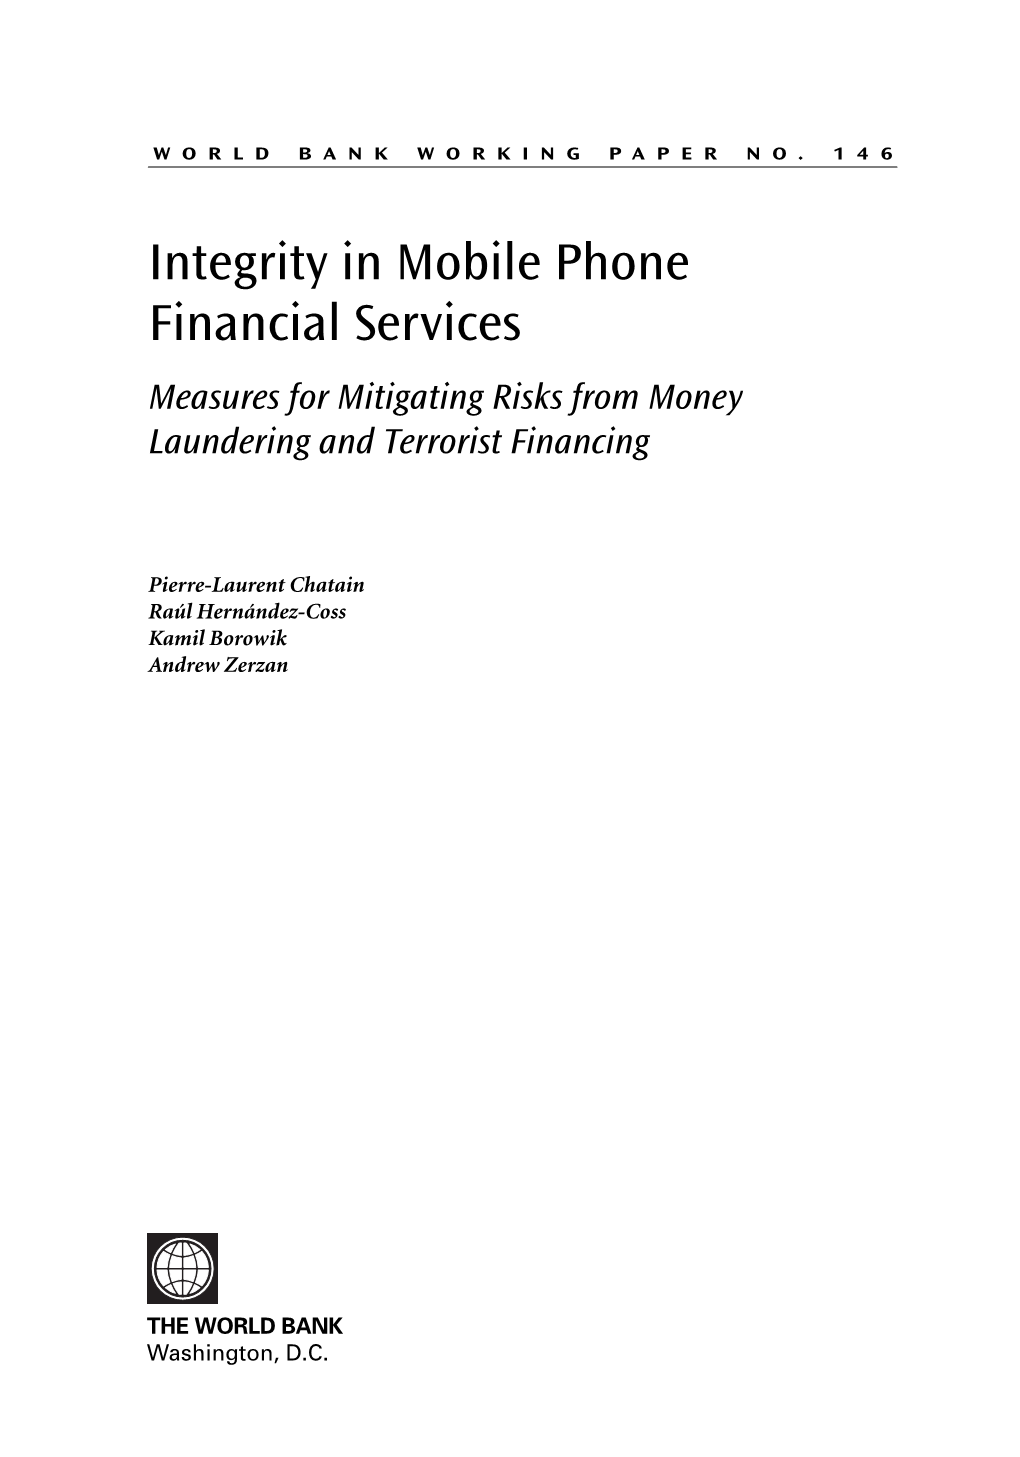 Integrity in Mobile Phone Financial Services Measures for Mitigating Risks from Money Laundering and Terrorist Financing